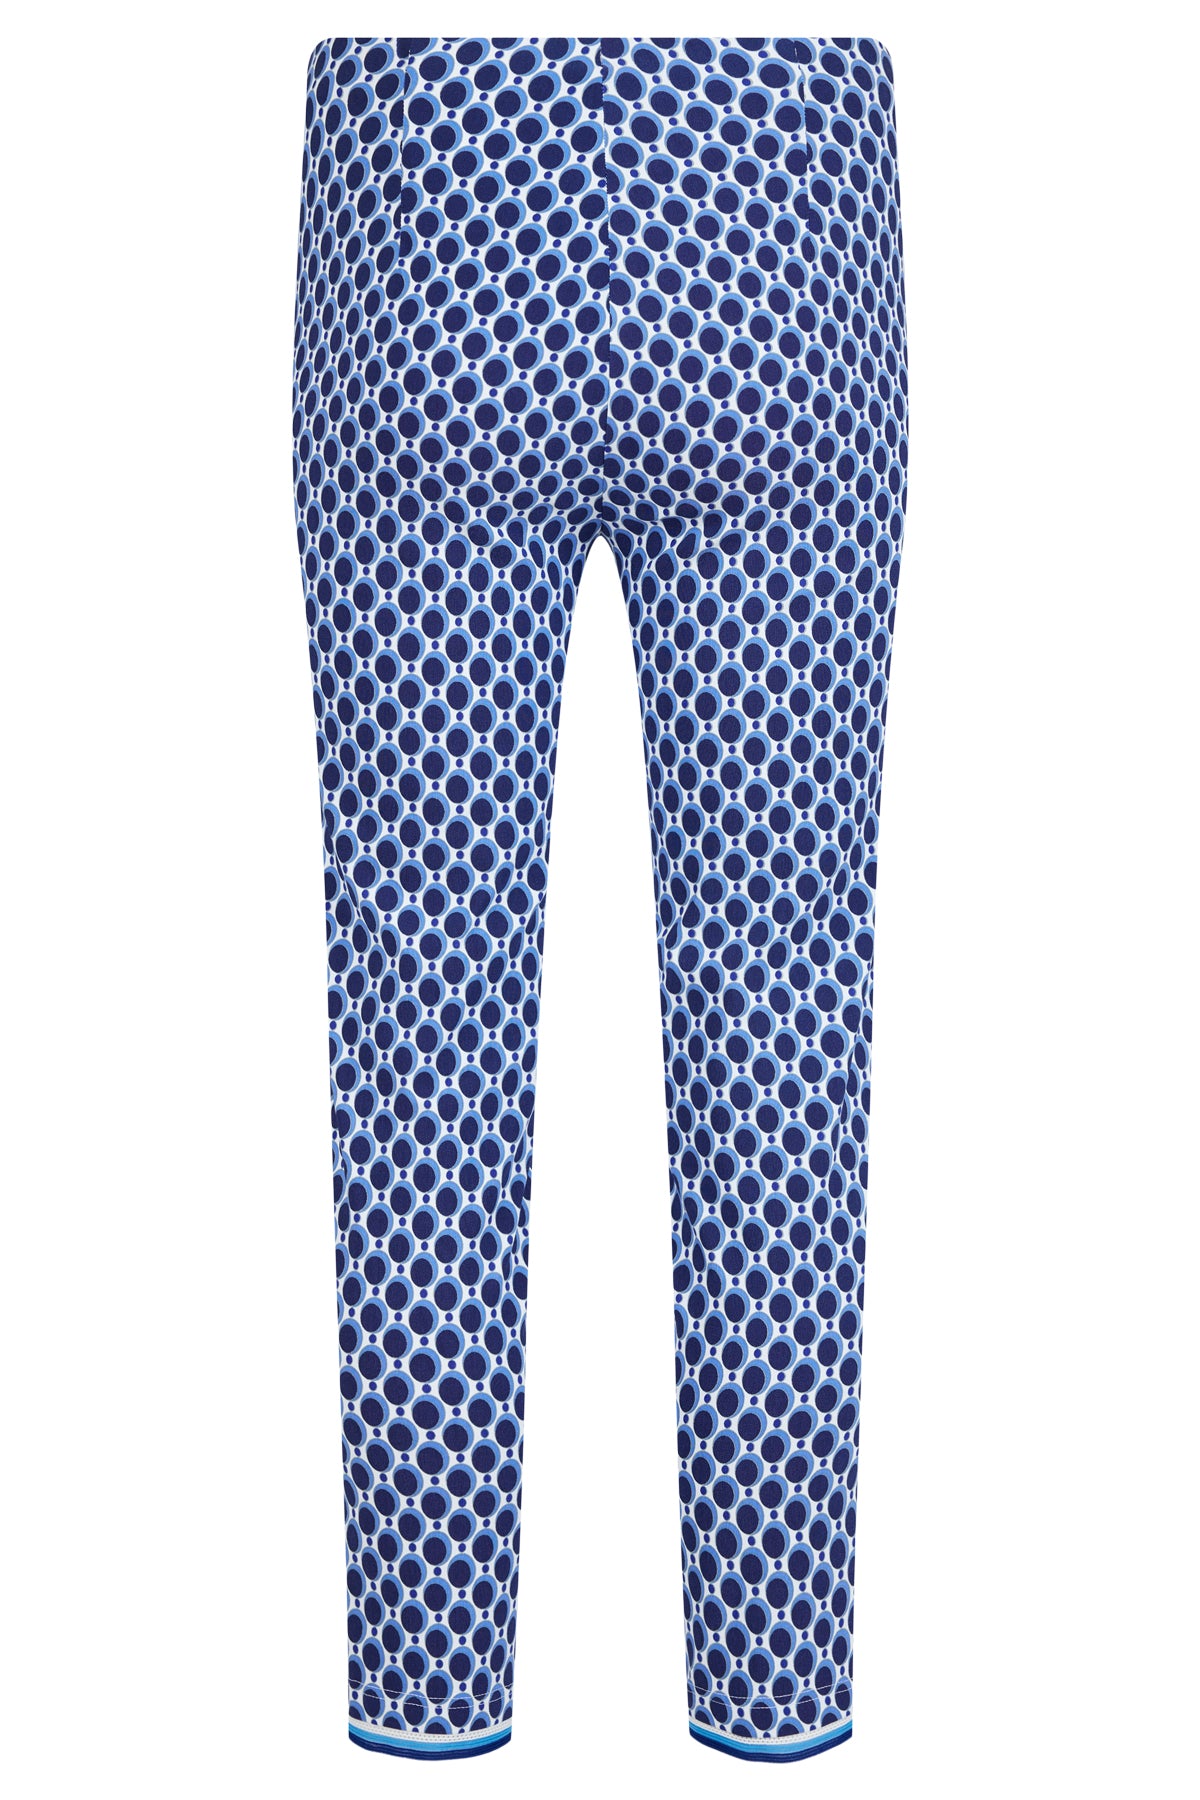 Rose Trouser in Blue Oval Print